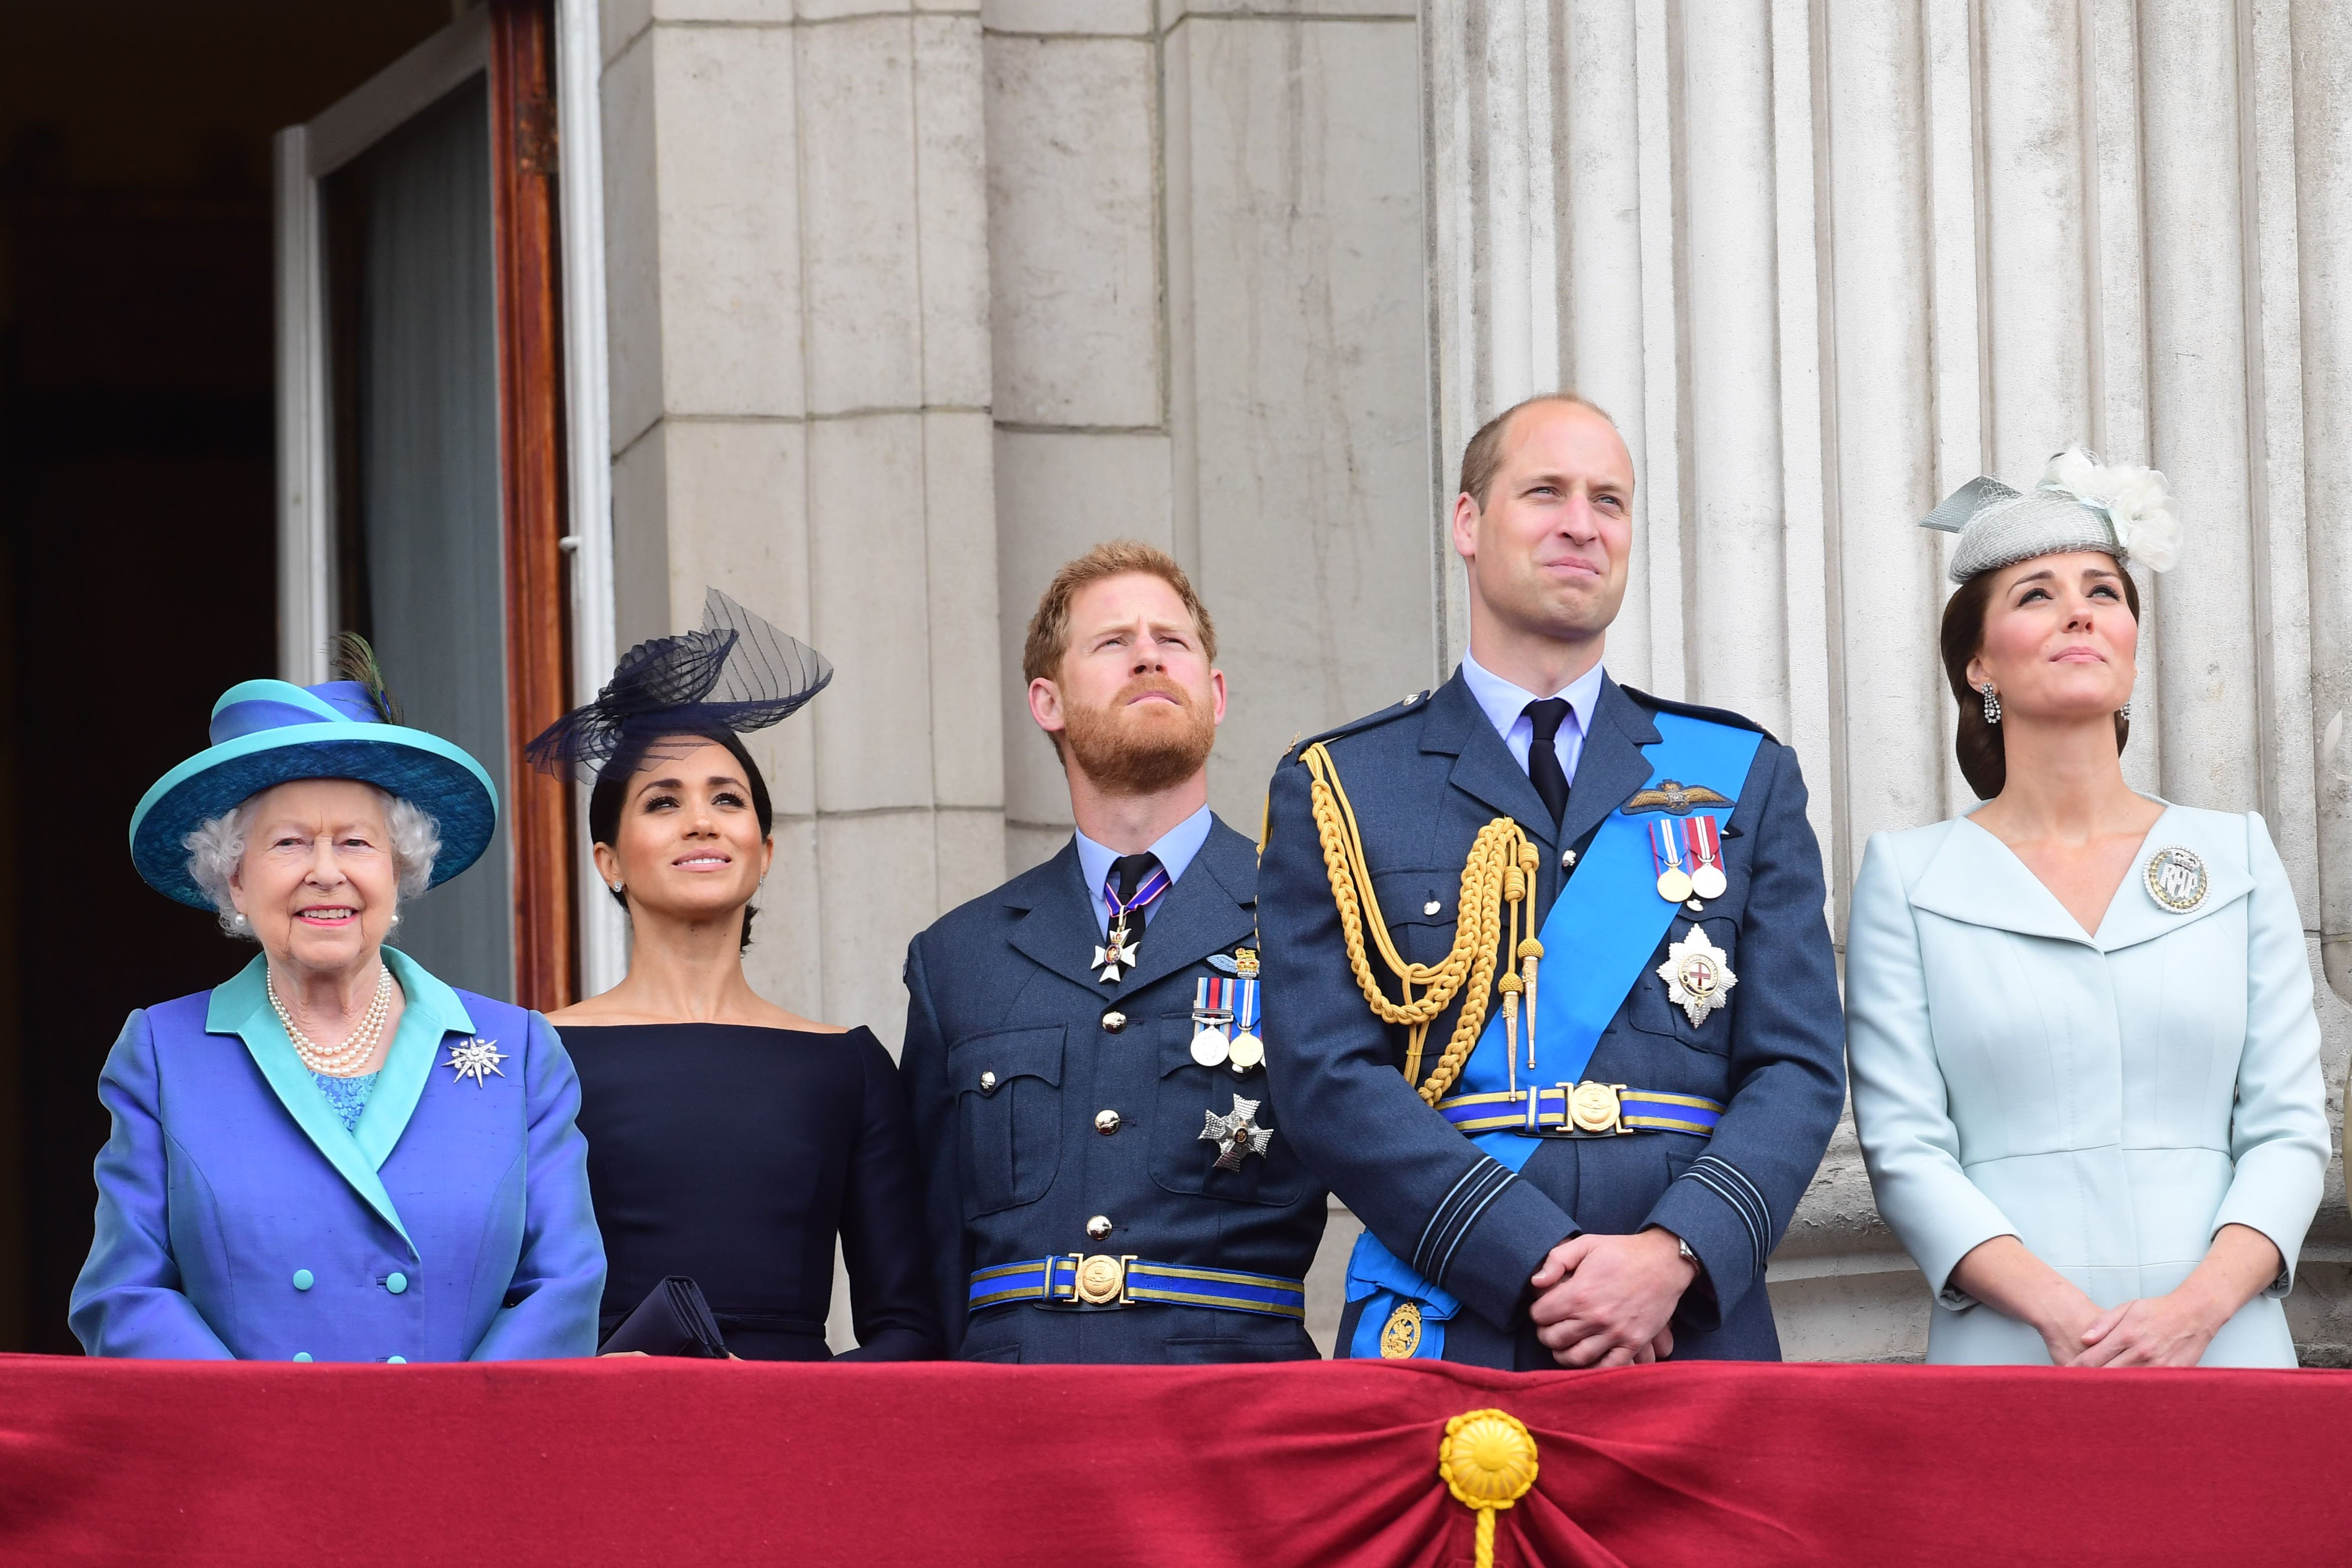 Queen Elizabeth II, Meghan, Duchess of Sussex, Prince Harry, Duke of Sussex, Prince William Duke of Cambridge and Catherine, Duchess of Cambridge watch the RAF 100th anniversary flypast from the balcony of Buckingham Palace on July 10, 2018 in London, England. | Source: Getty Images